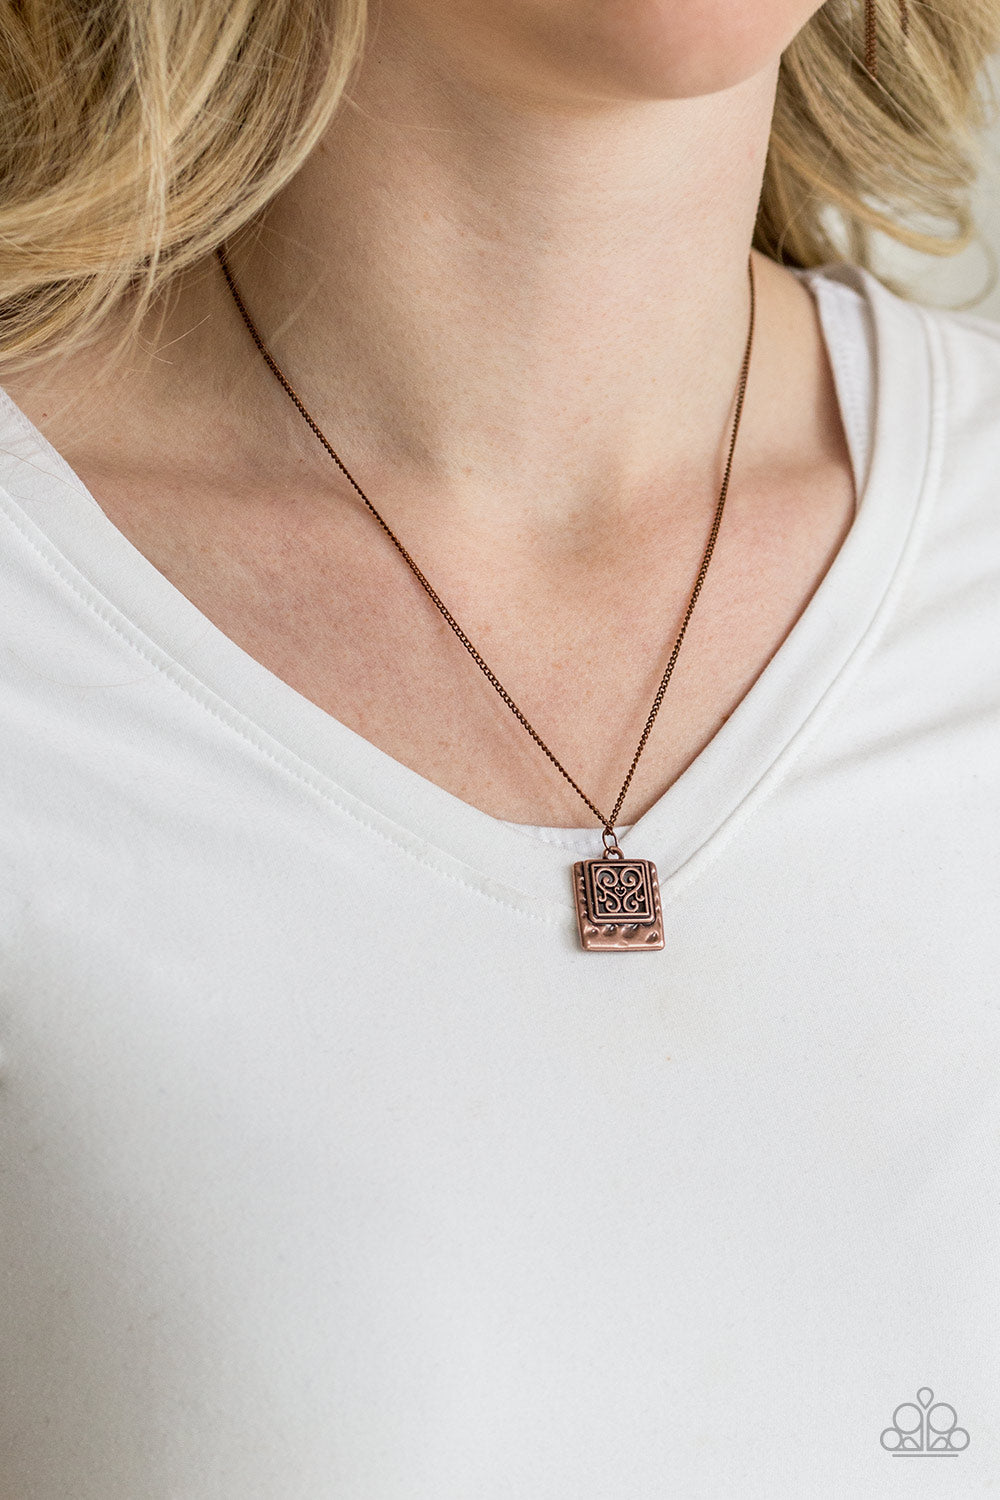 Back To Square One - Copper Necklace